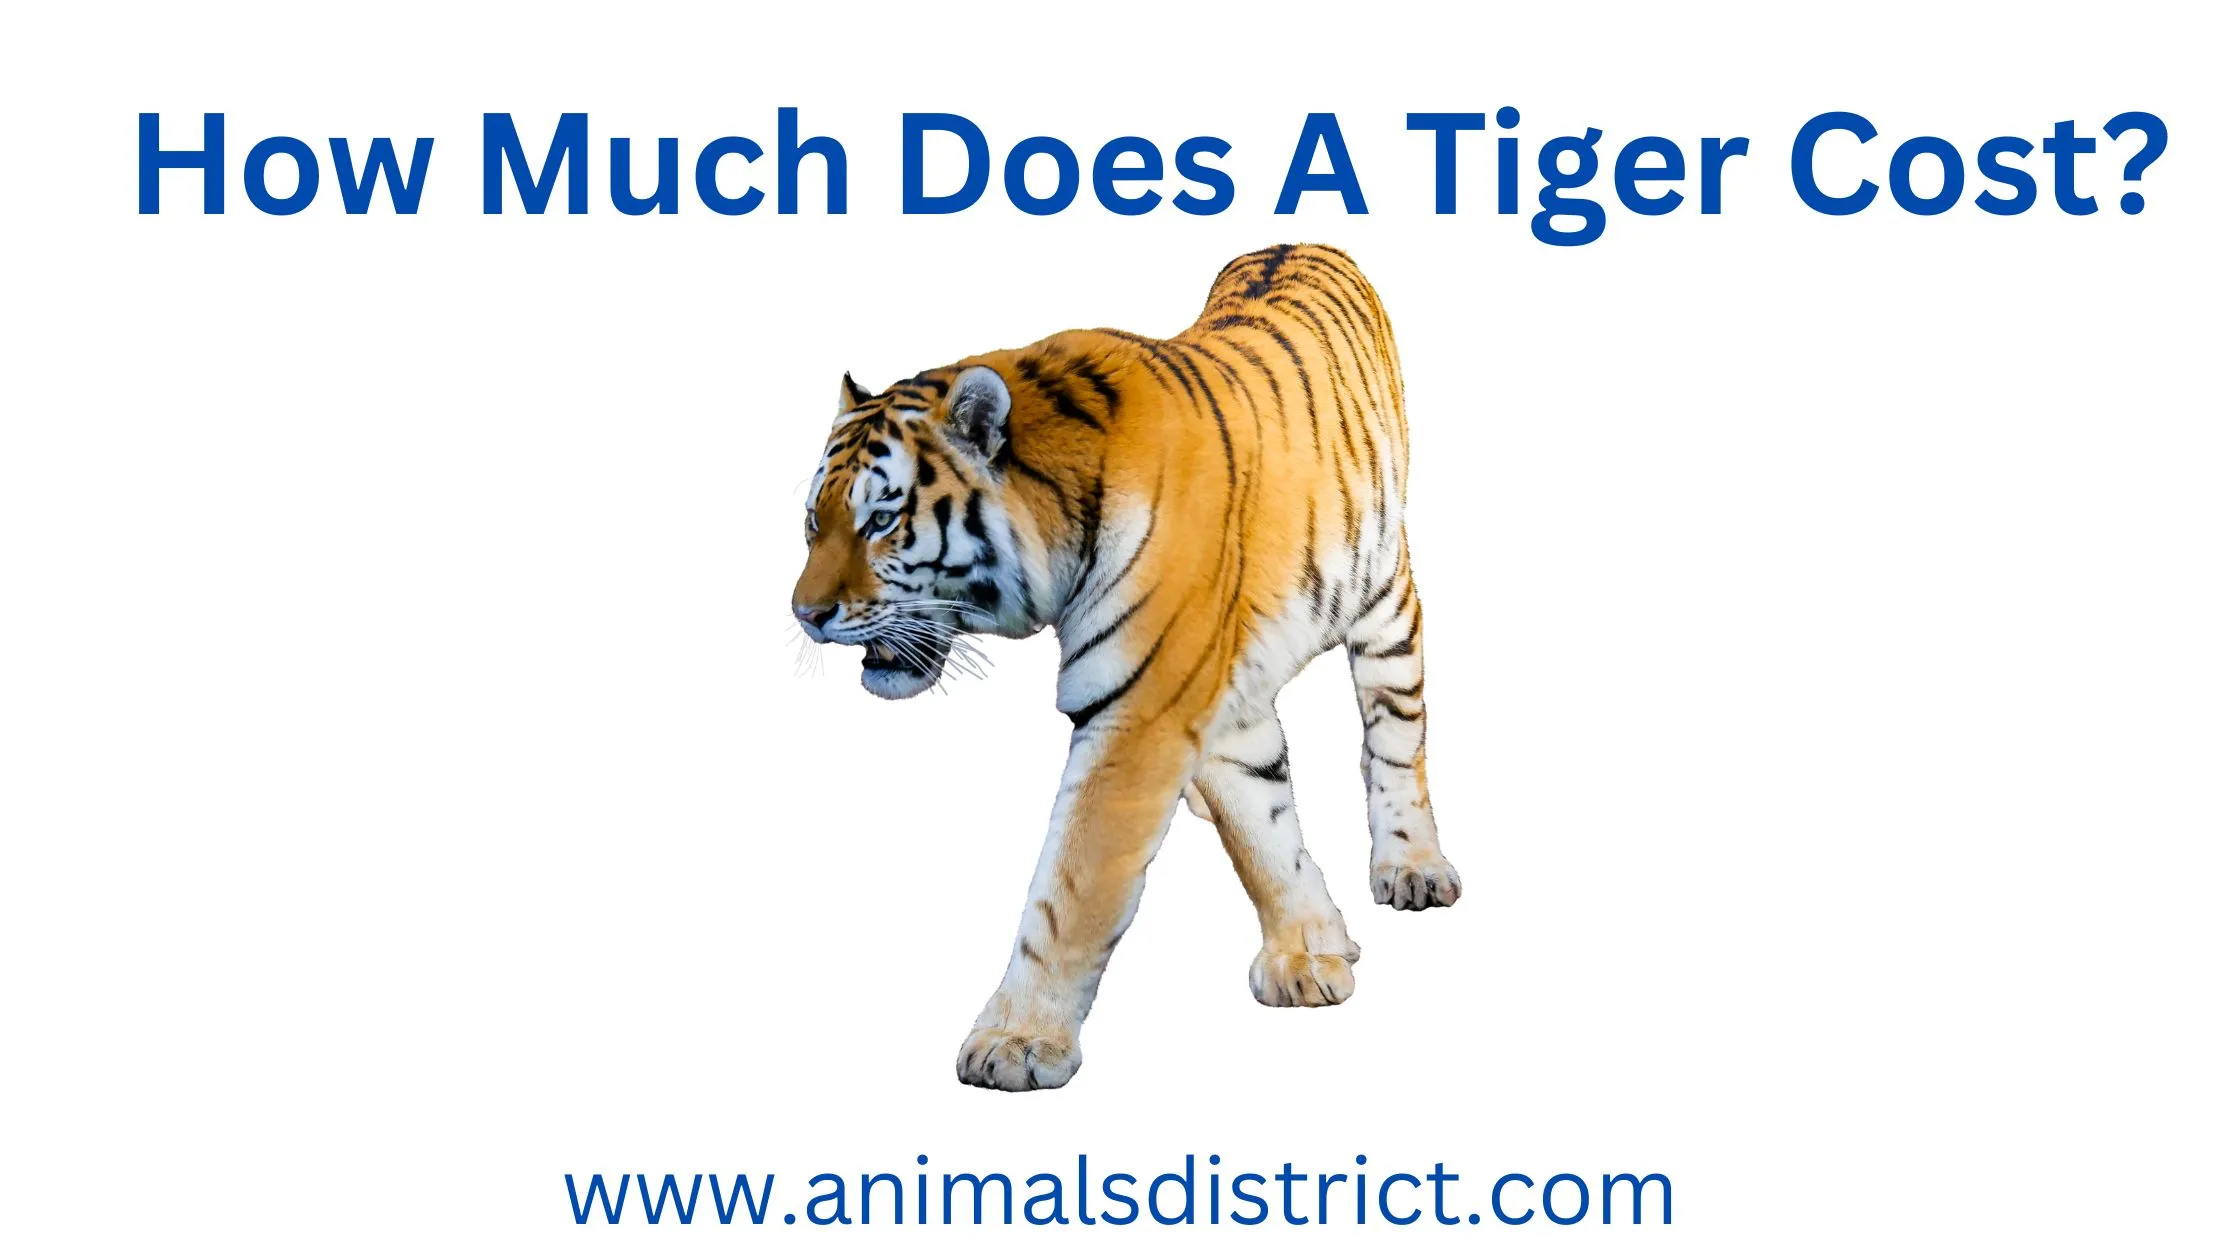 How Much Does A Tiger Cost